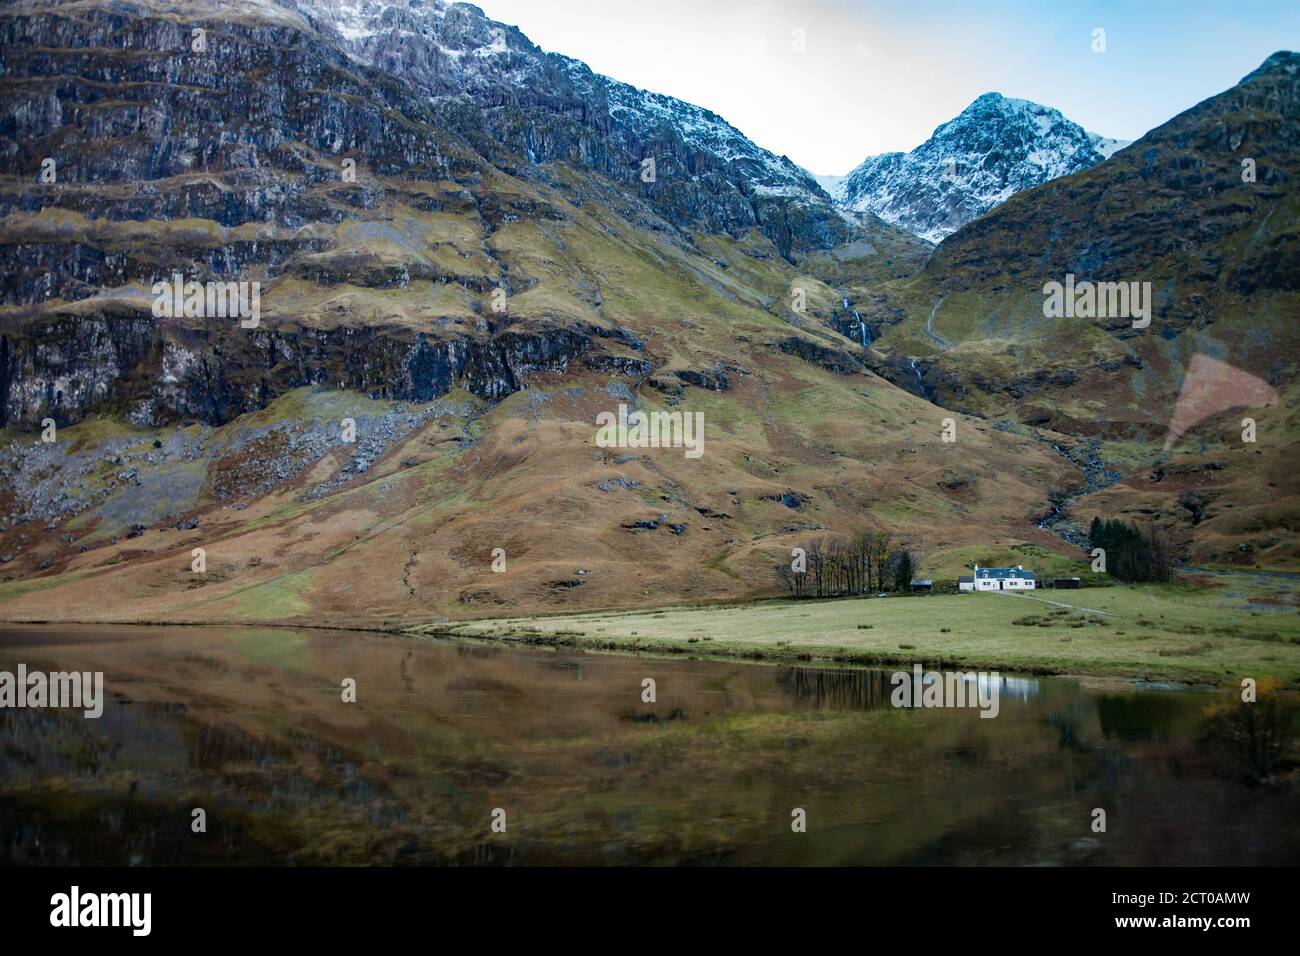 Highlands, Scotland in fall. Rural views with lake, small white house on the beach and mountains. Mountain peaks with snow. Blue sky. Stock Photo